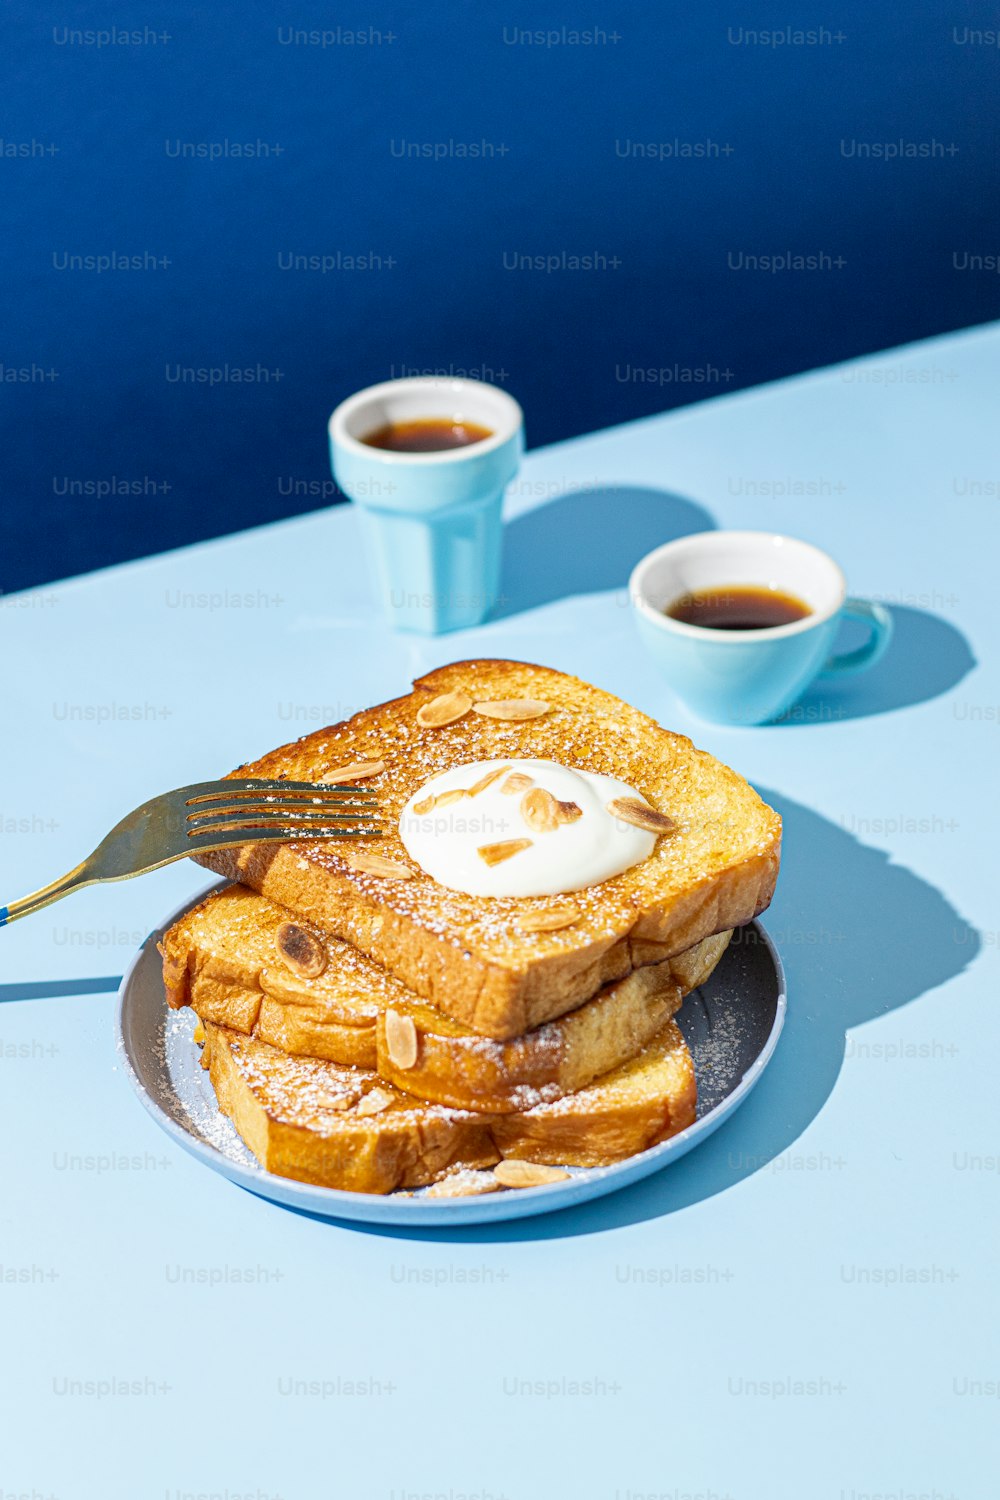 a plate of french toast with butter and syrup